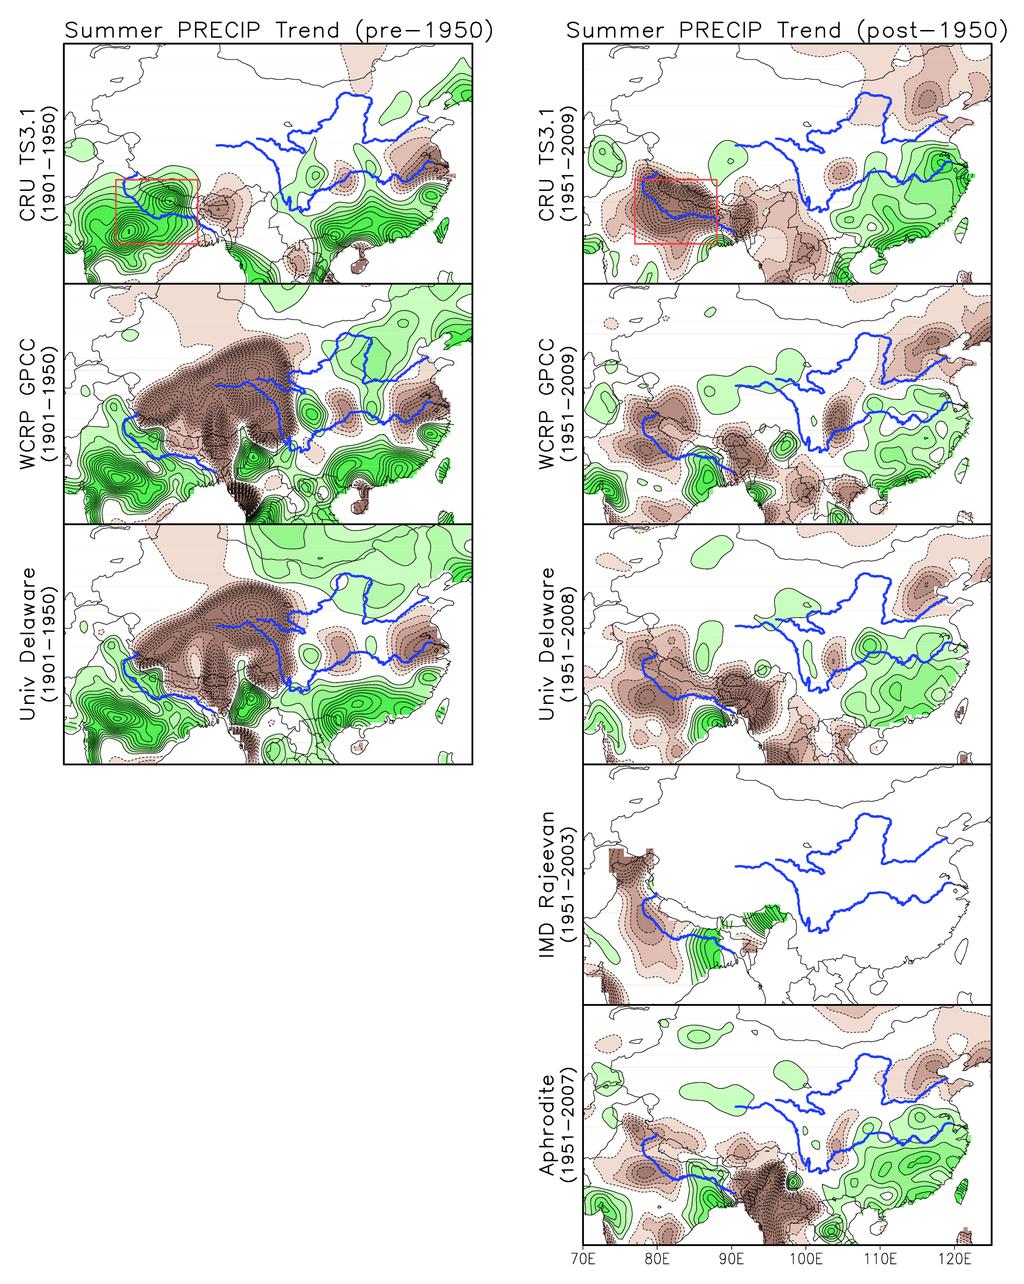 Trends of S. Asia and E. Asia summer rainfall Linear trend in summer rainfall in the post--1950 period is plotted at 0.5 mm/day/century interval in the 0.5 resolution CRU TS 3.